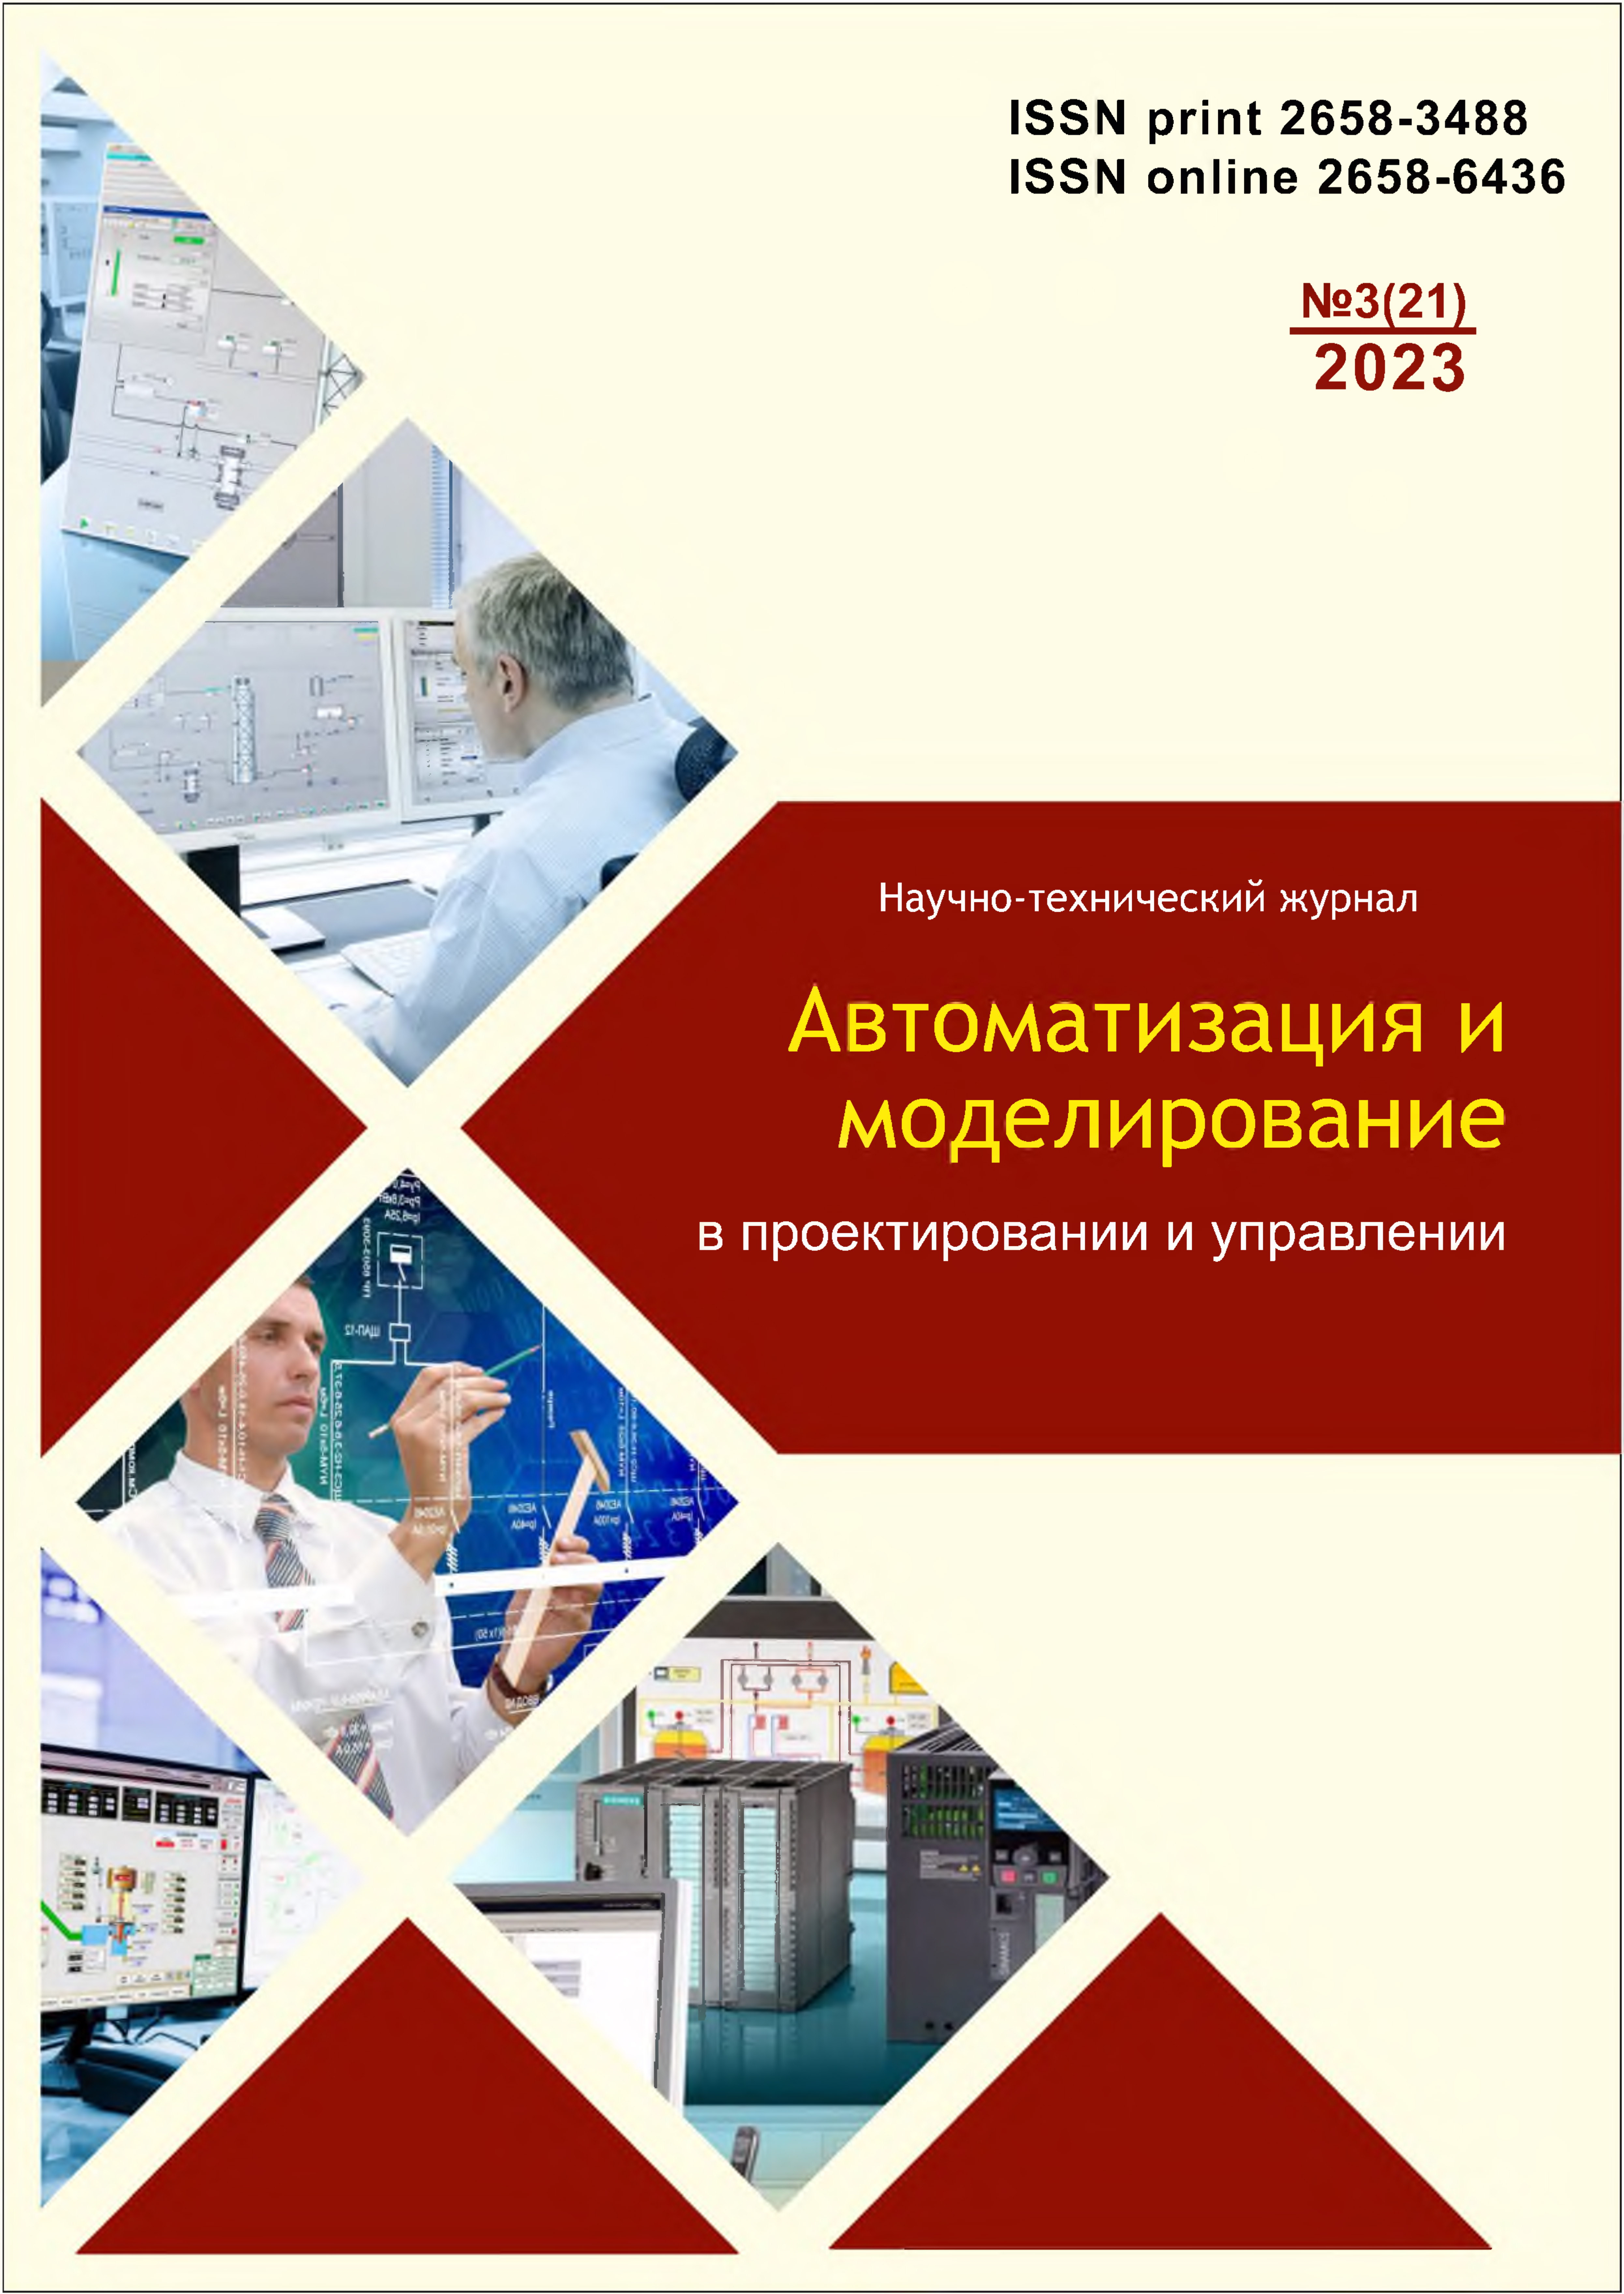                         DIGITAL MODEL IN THE FIELD OF GENERAL EDUCATION BRYANSK REGION AS A WAY OF FORMING PERSONNEL FOR THE DIGITAL ECONOMY
            